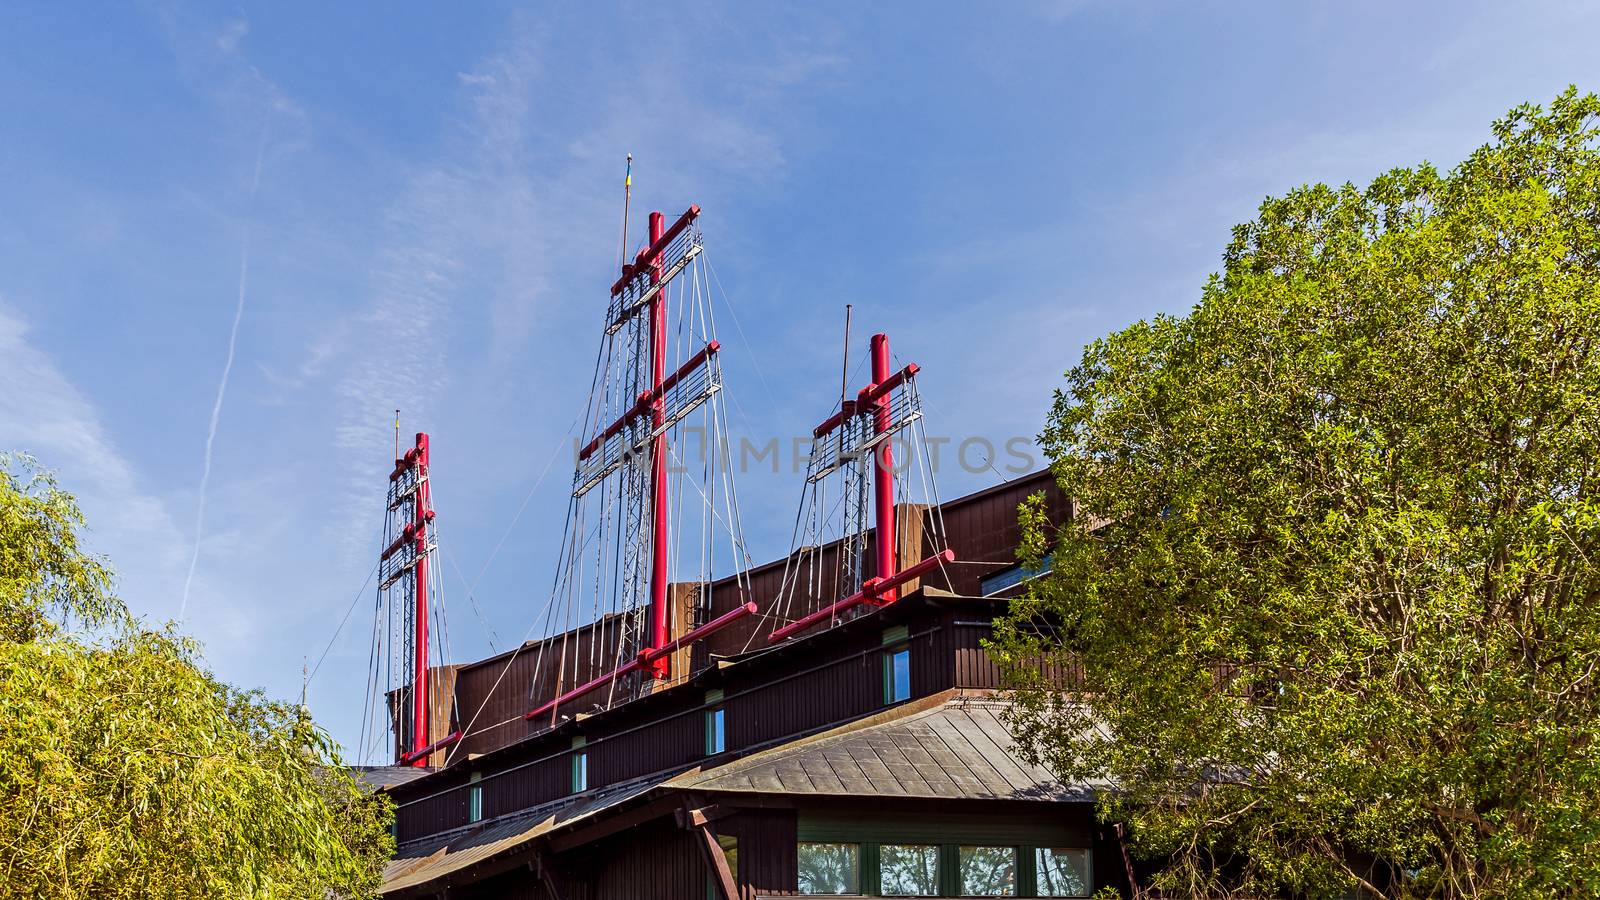 The Vasa Museum founded in 1998 to display the salvaged warship Vasa that sank in 1628. Stylized masts represent the actual height of Vasa when she was fully rigged.